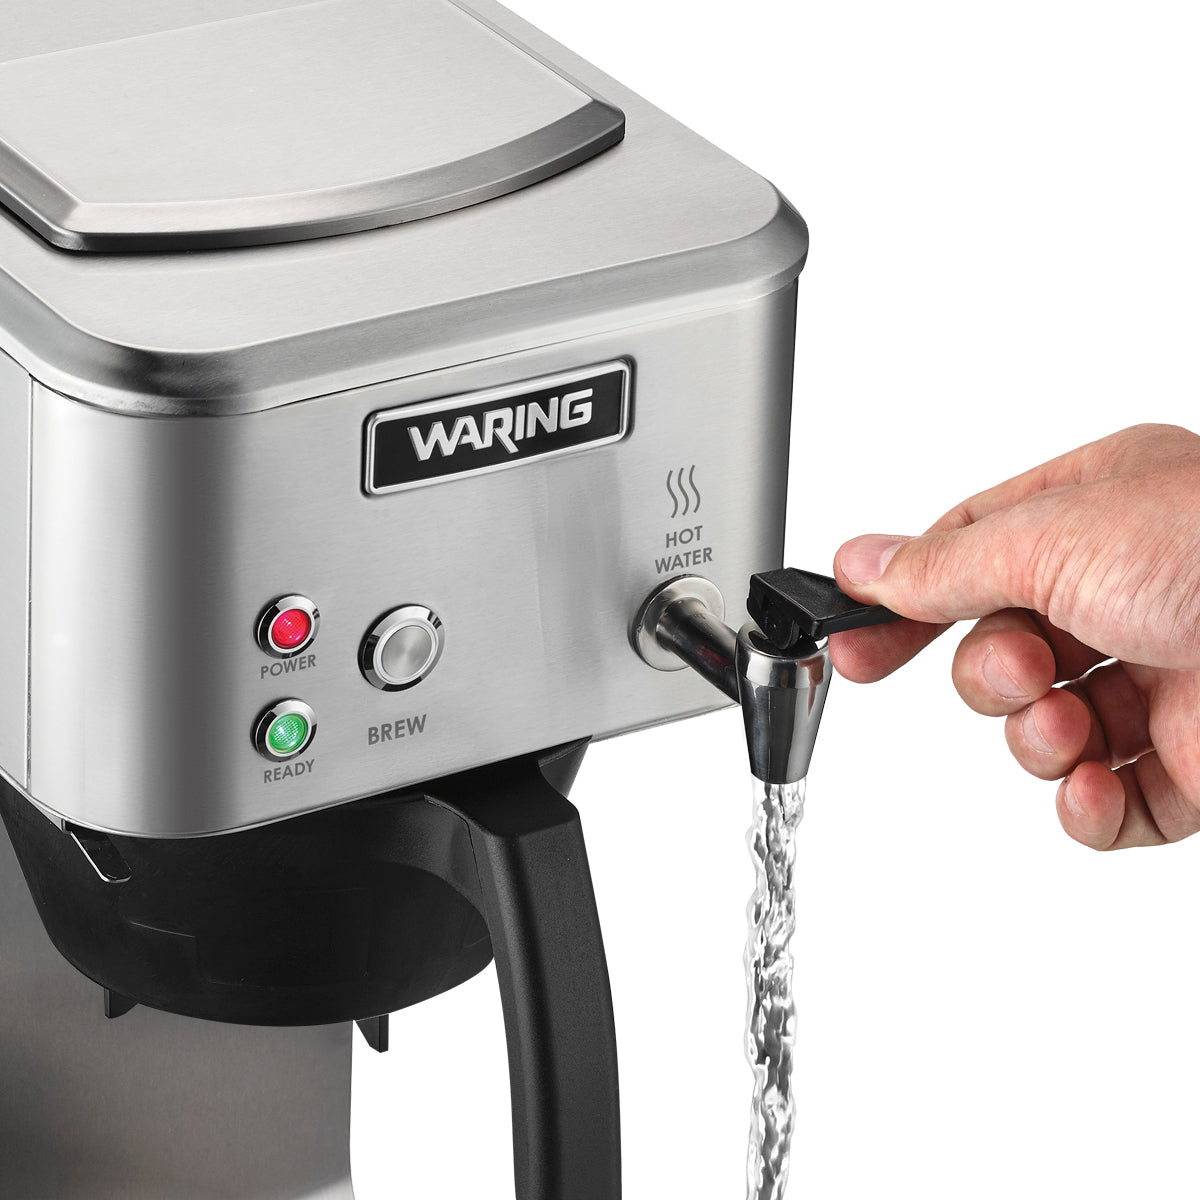 WCM60PT "Café Deco" Thermal Coffee Brewer with Hot Water Faucet by Waring Commercial